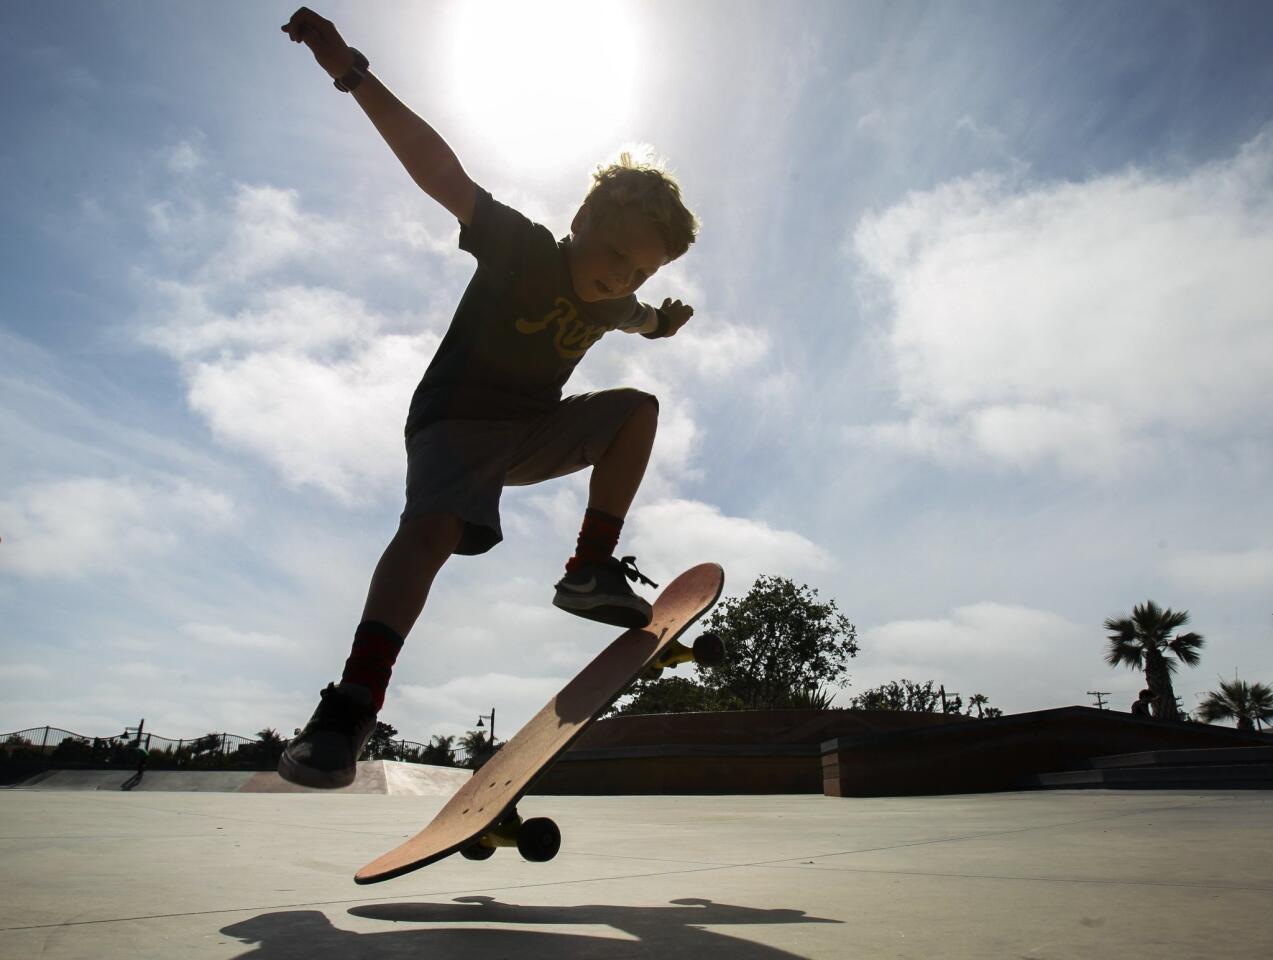 Eight-year-old Ryan Scully rides his skateboard while wearing a wrist device and heart rate monitor on his chest, to record heart rate, how far he's skated, and length of time skating.